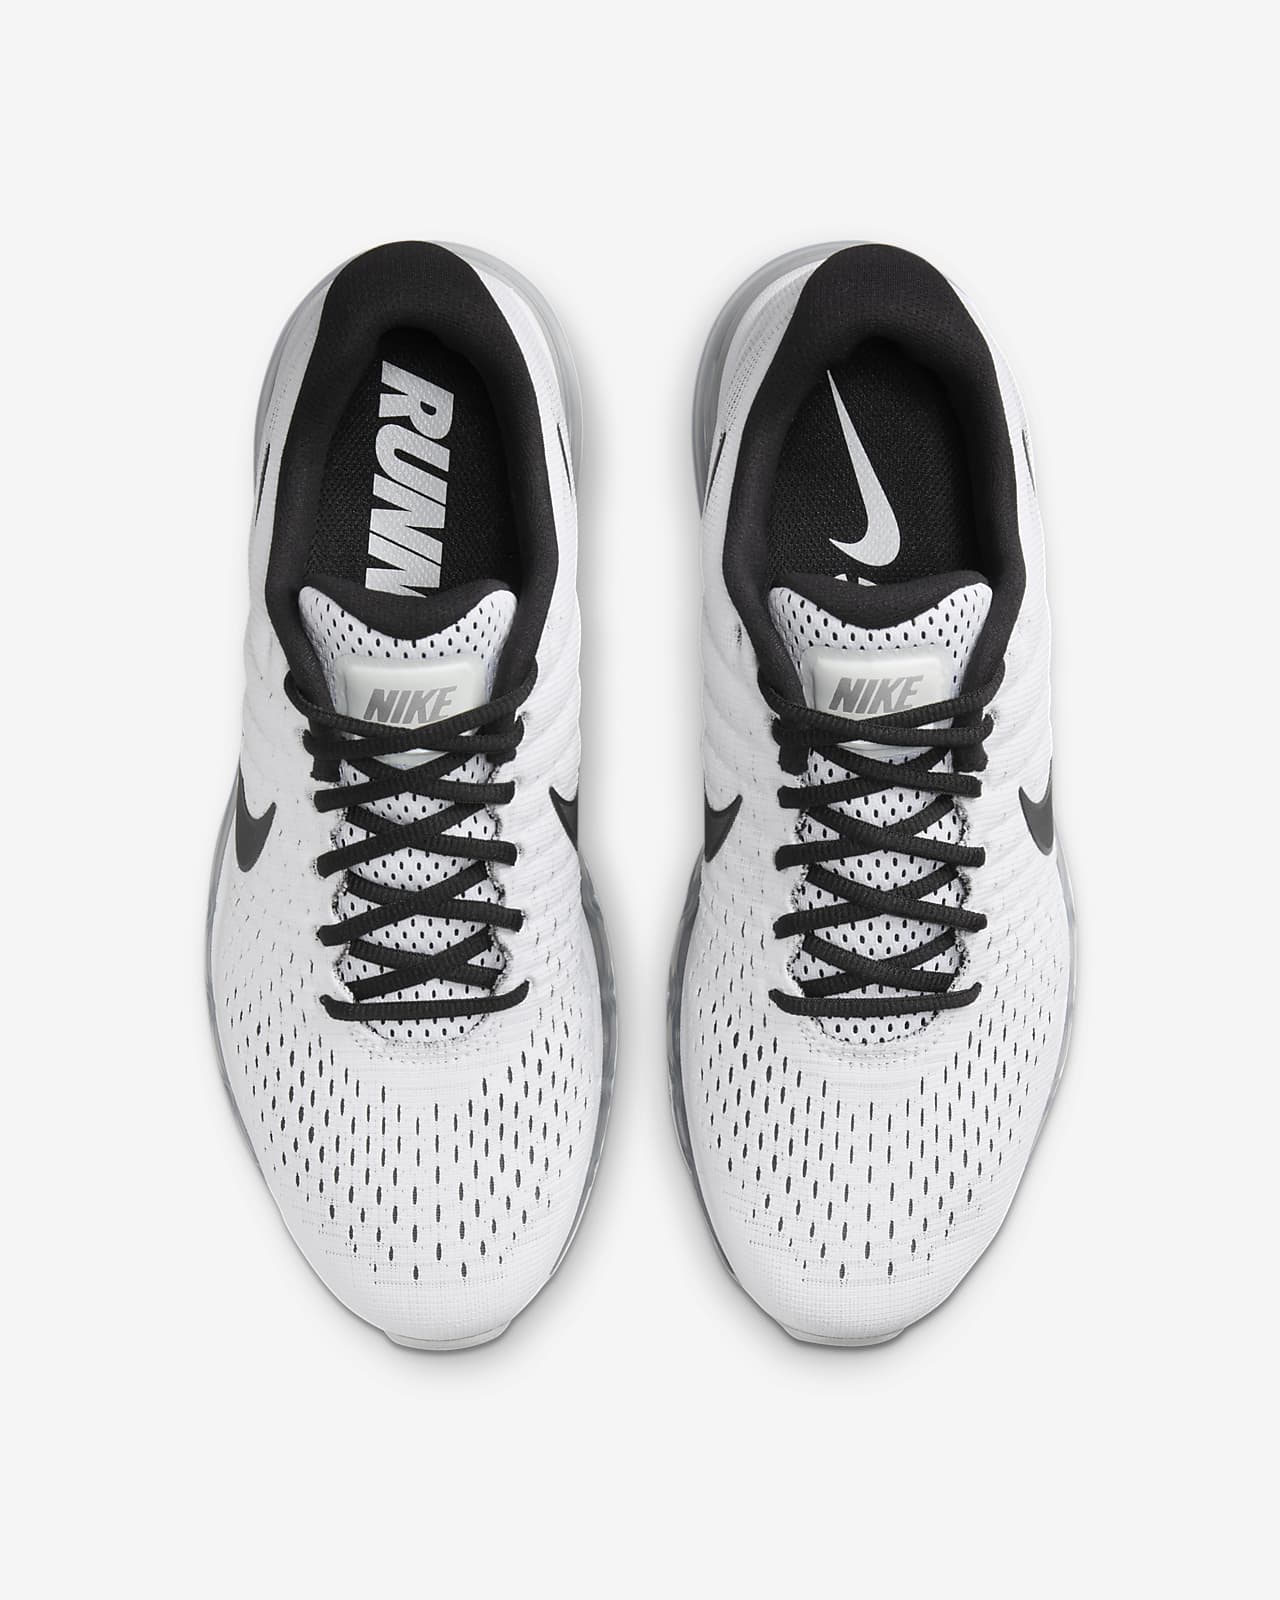 Buy Nike Men's Court Borough Mid Black Sneakers-UK-8 Online at Low Prices  in India - Paytmmall.com